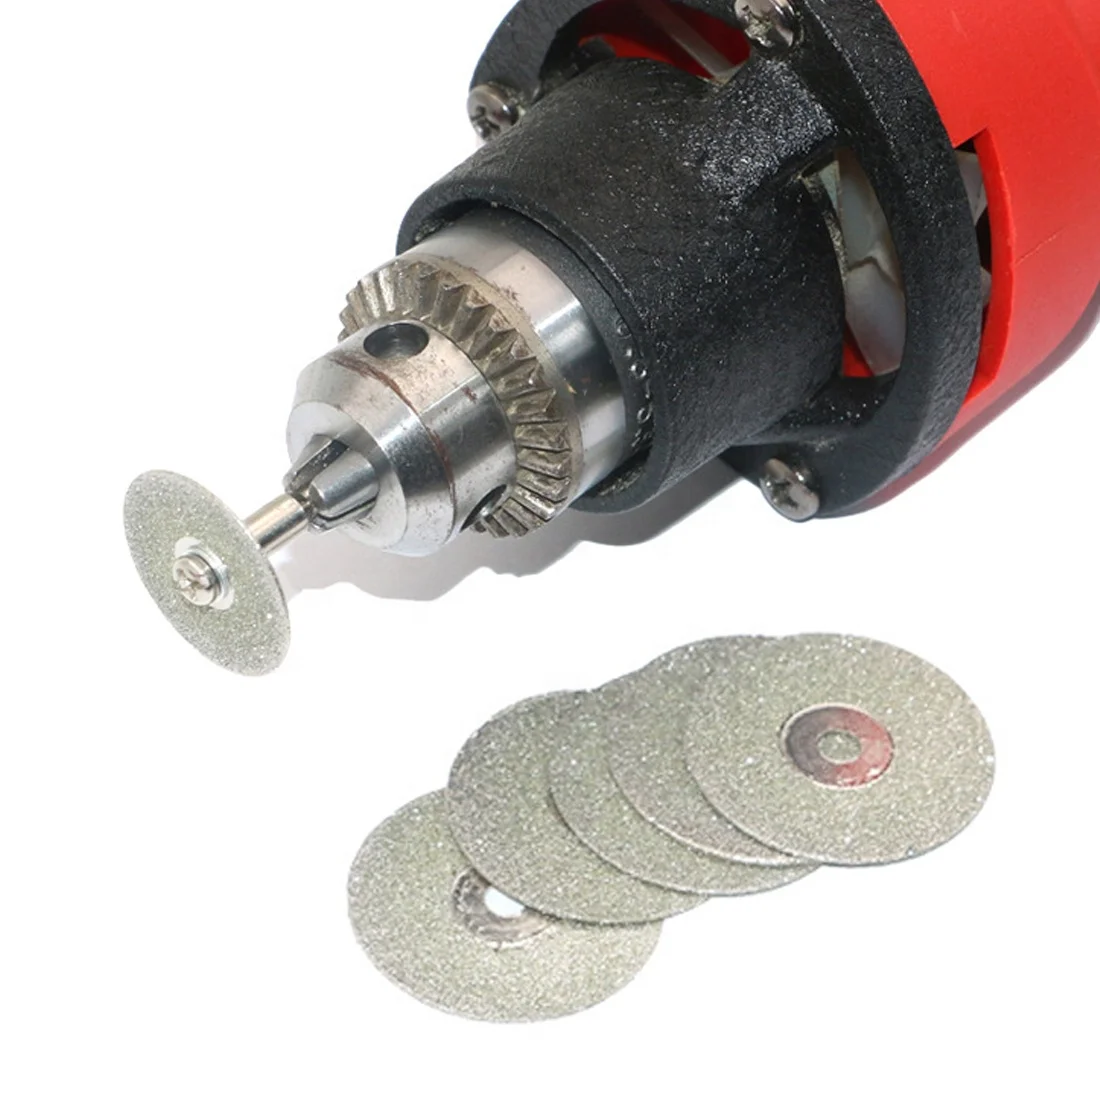 Hot Tool Mini Cutting Disc For Rotory Accessories Diamond Grinding Wheel 